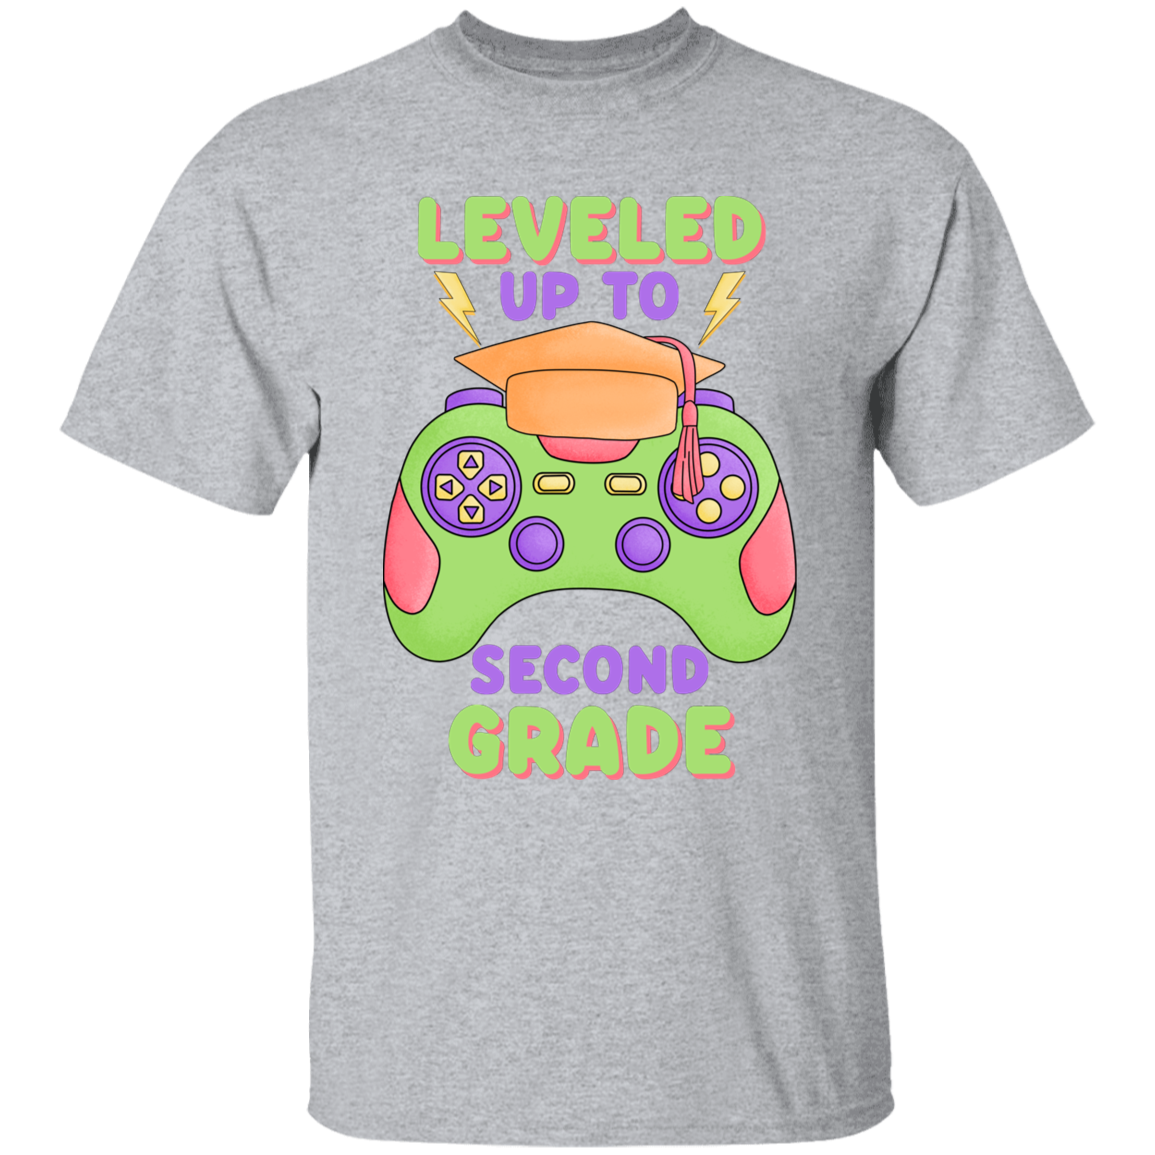 Level Up To Second Grade Youth Cotton T-Shirt